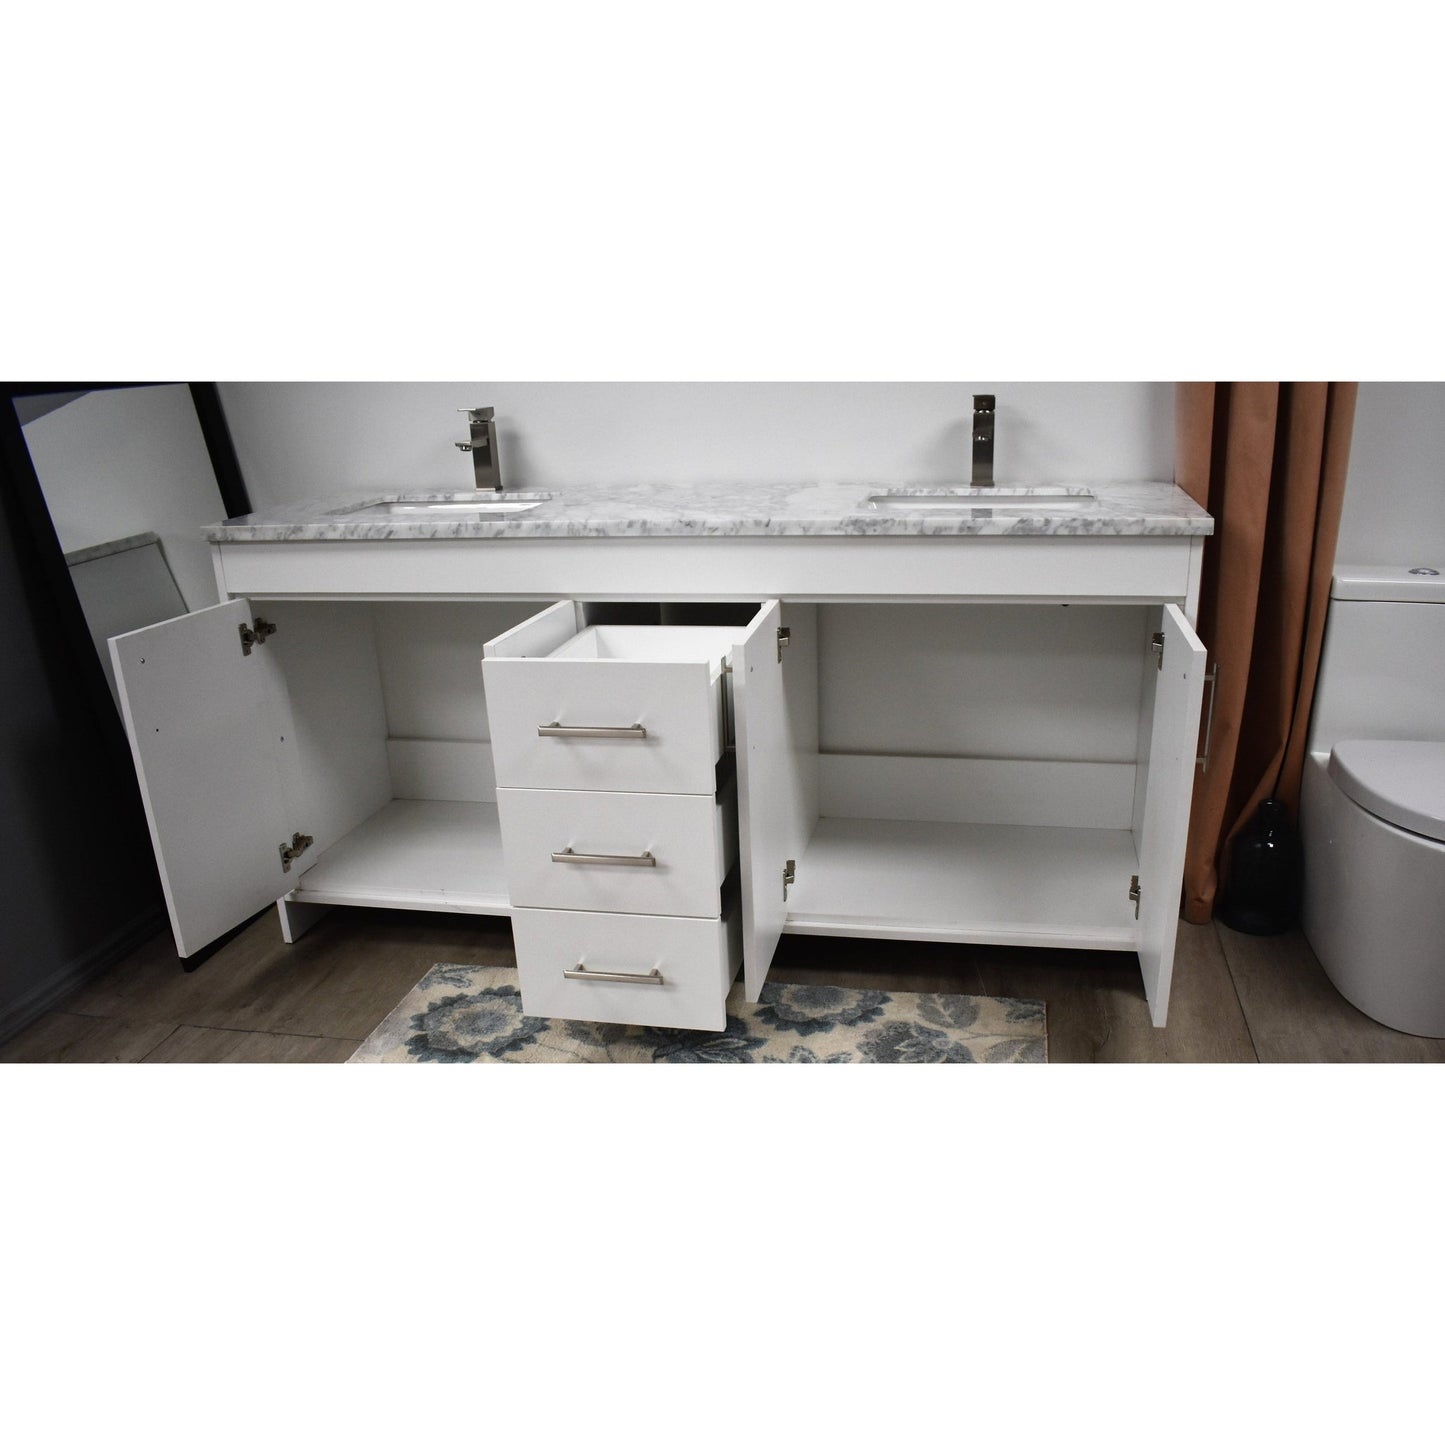 Volpa USA Capri 60" x 22" White Freestanding Modern Bathroom Vanity With Undermount Double Sink And Carrara Marble Top With Brushed Nickel Edge Handles